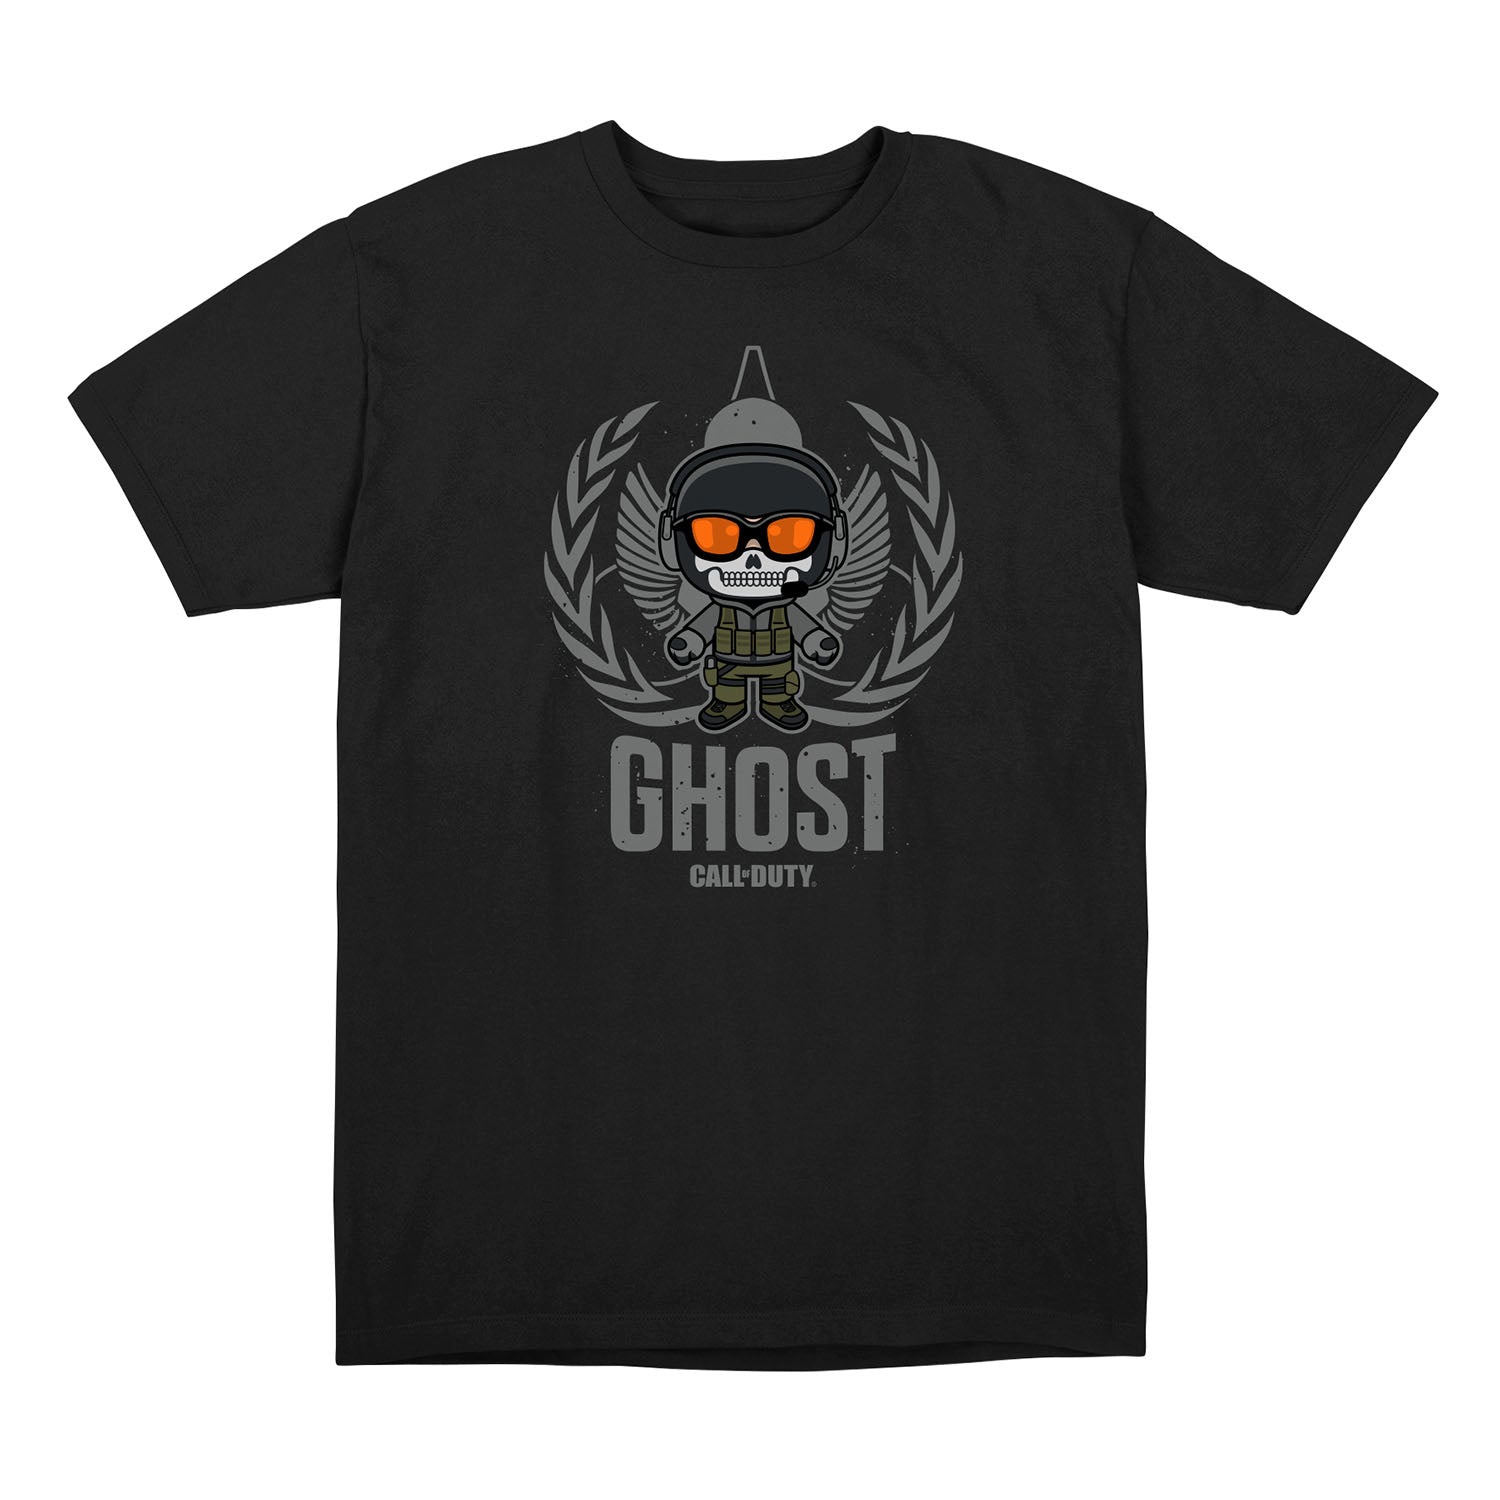 Call of Duty Black Chibi Ghost T-Shirt - Front View